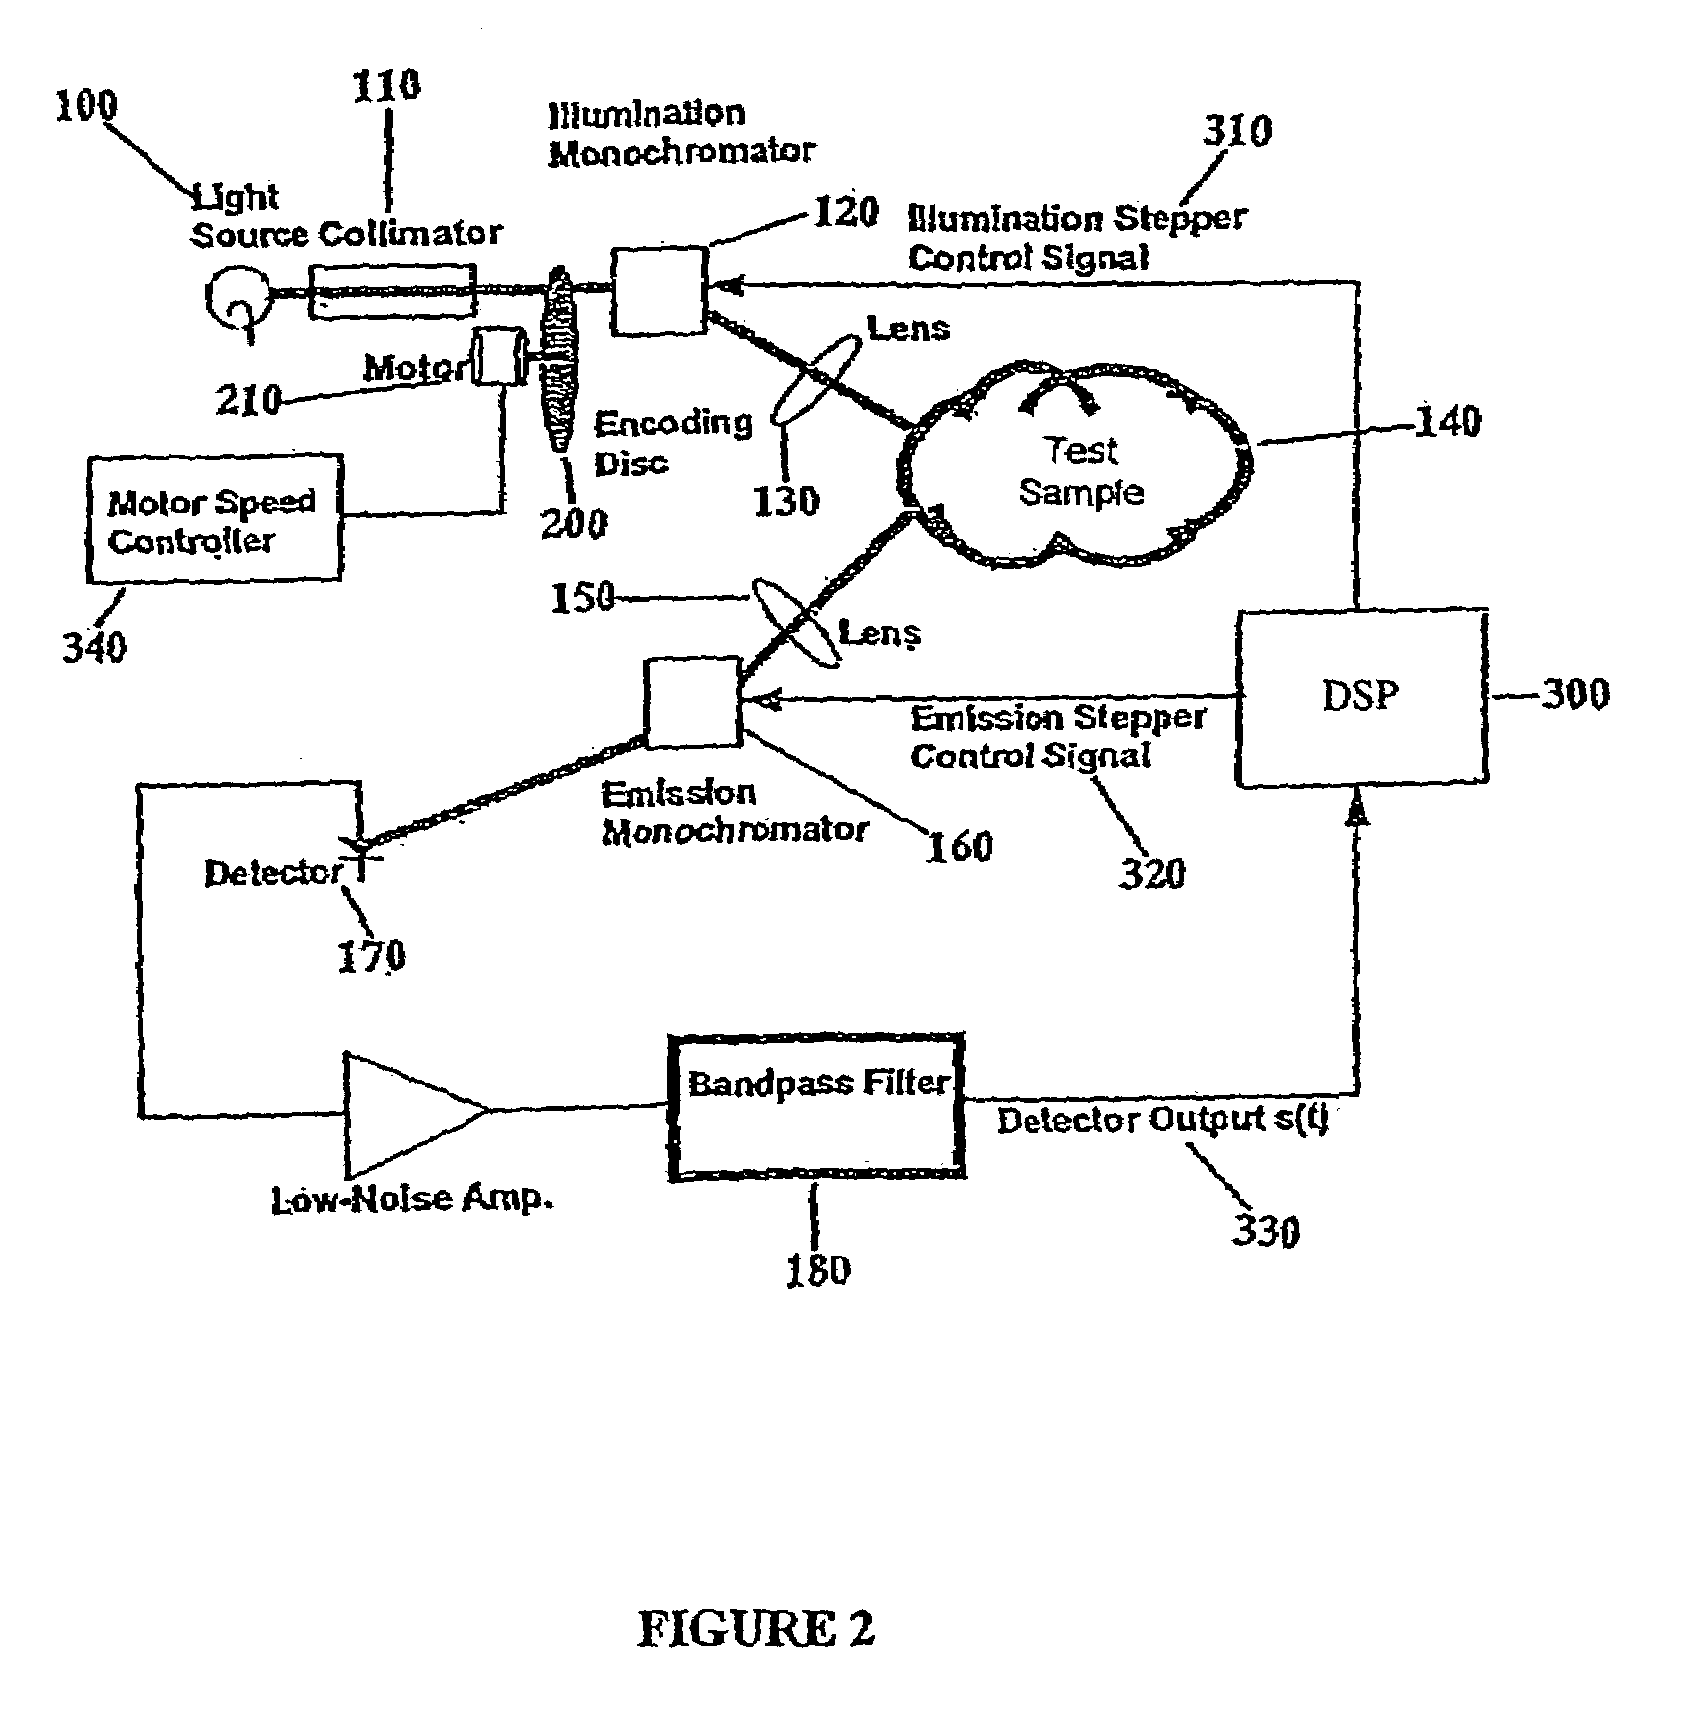 Spectrometer incorporating signal matched filtering